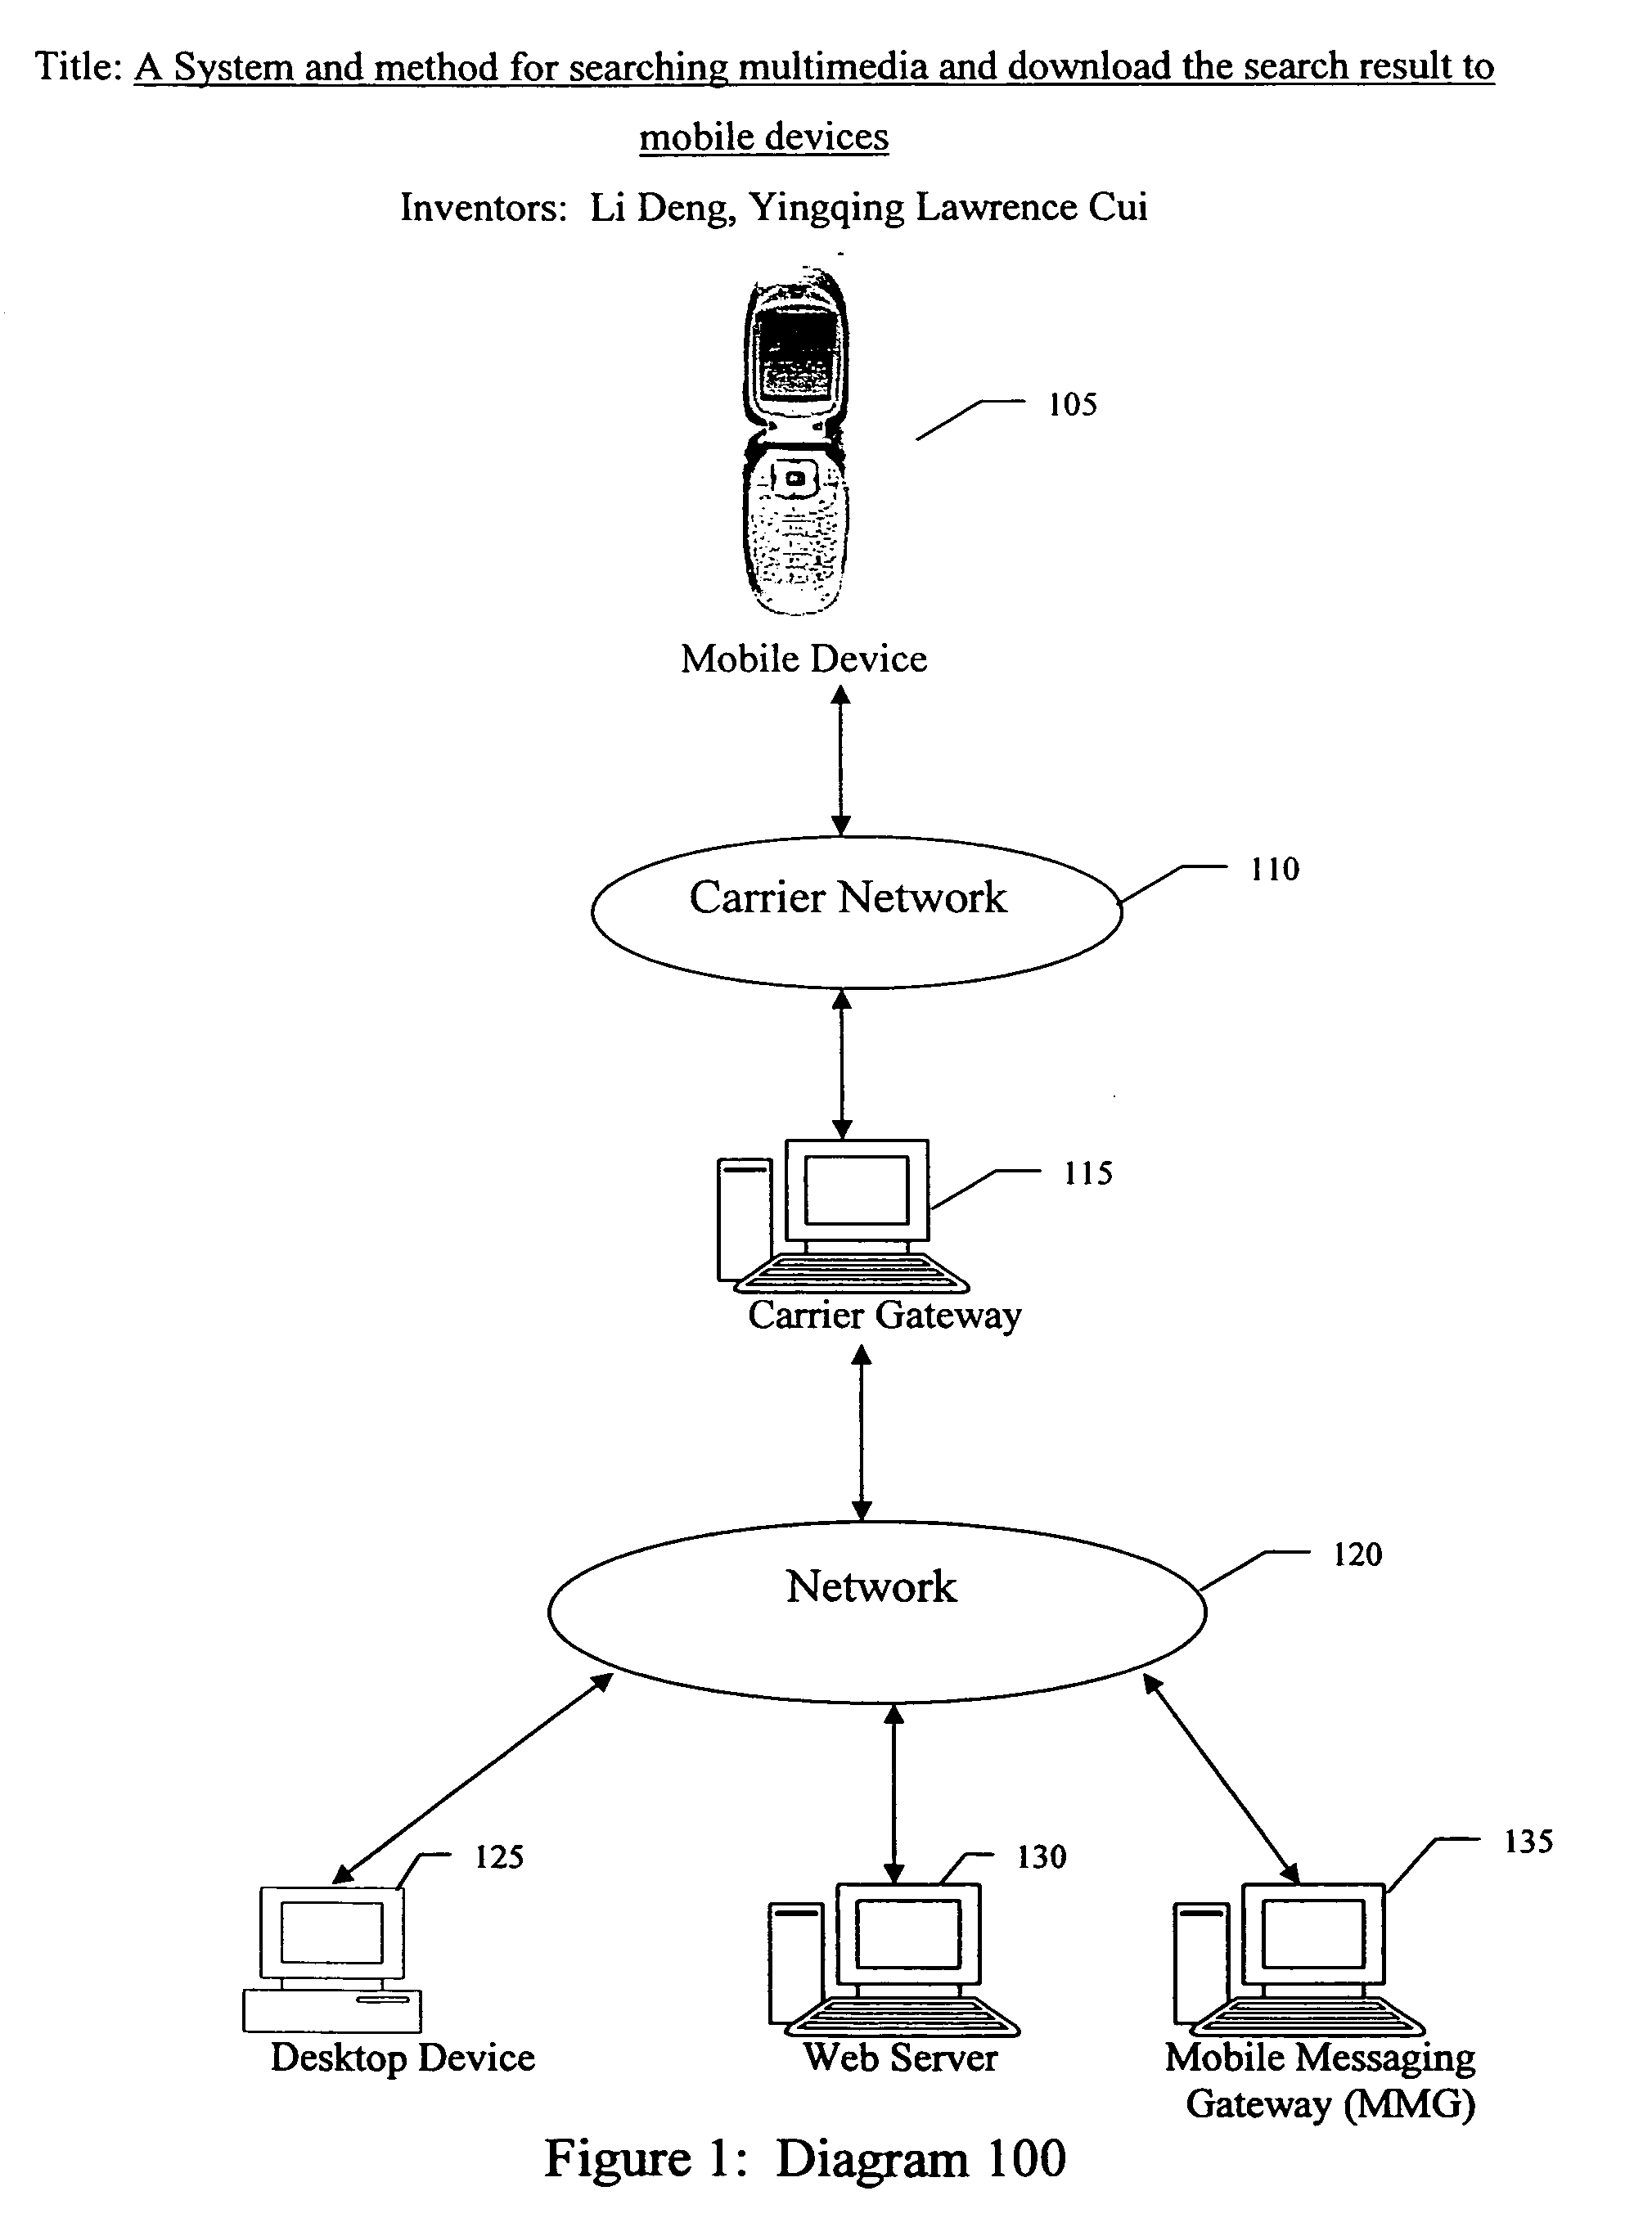 System and method for searching multimedia and download the search result to mobile devices